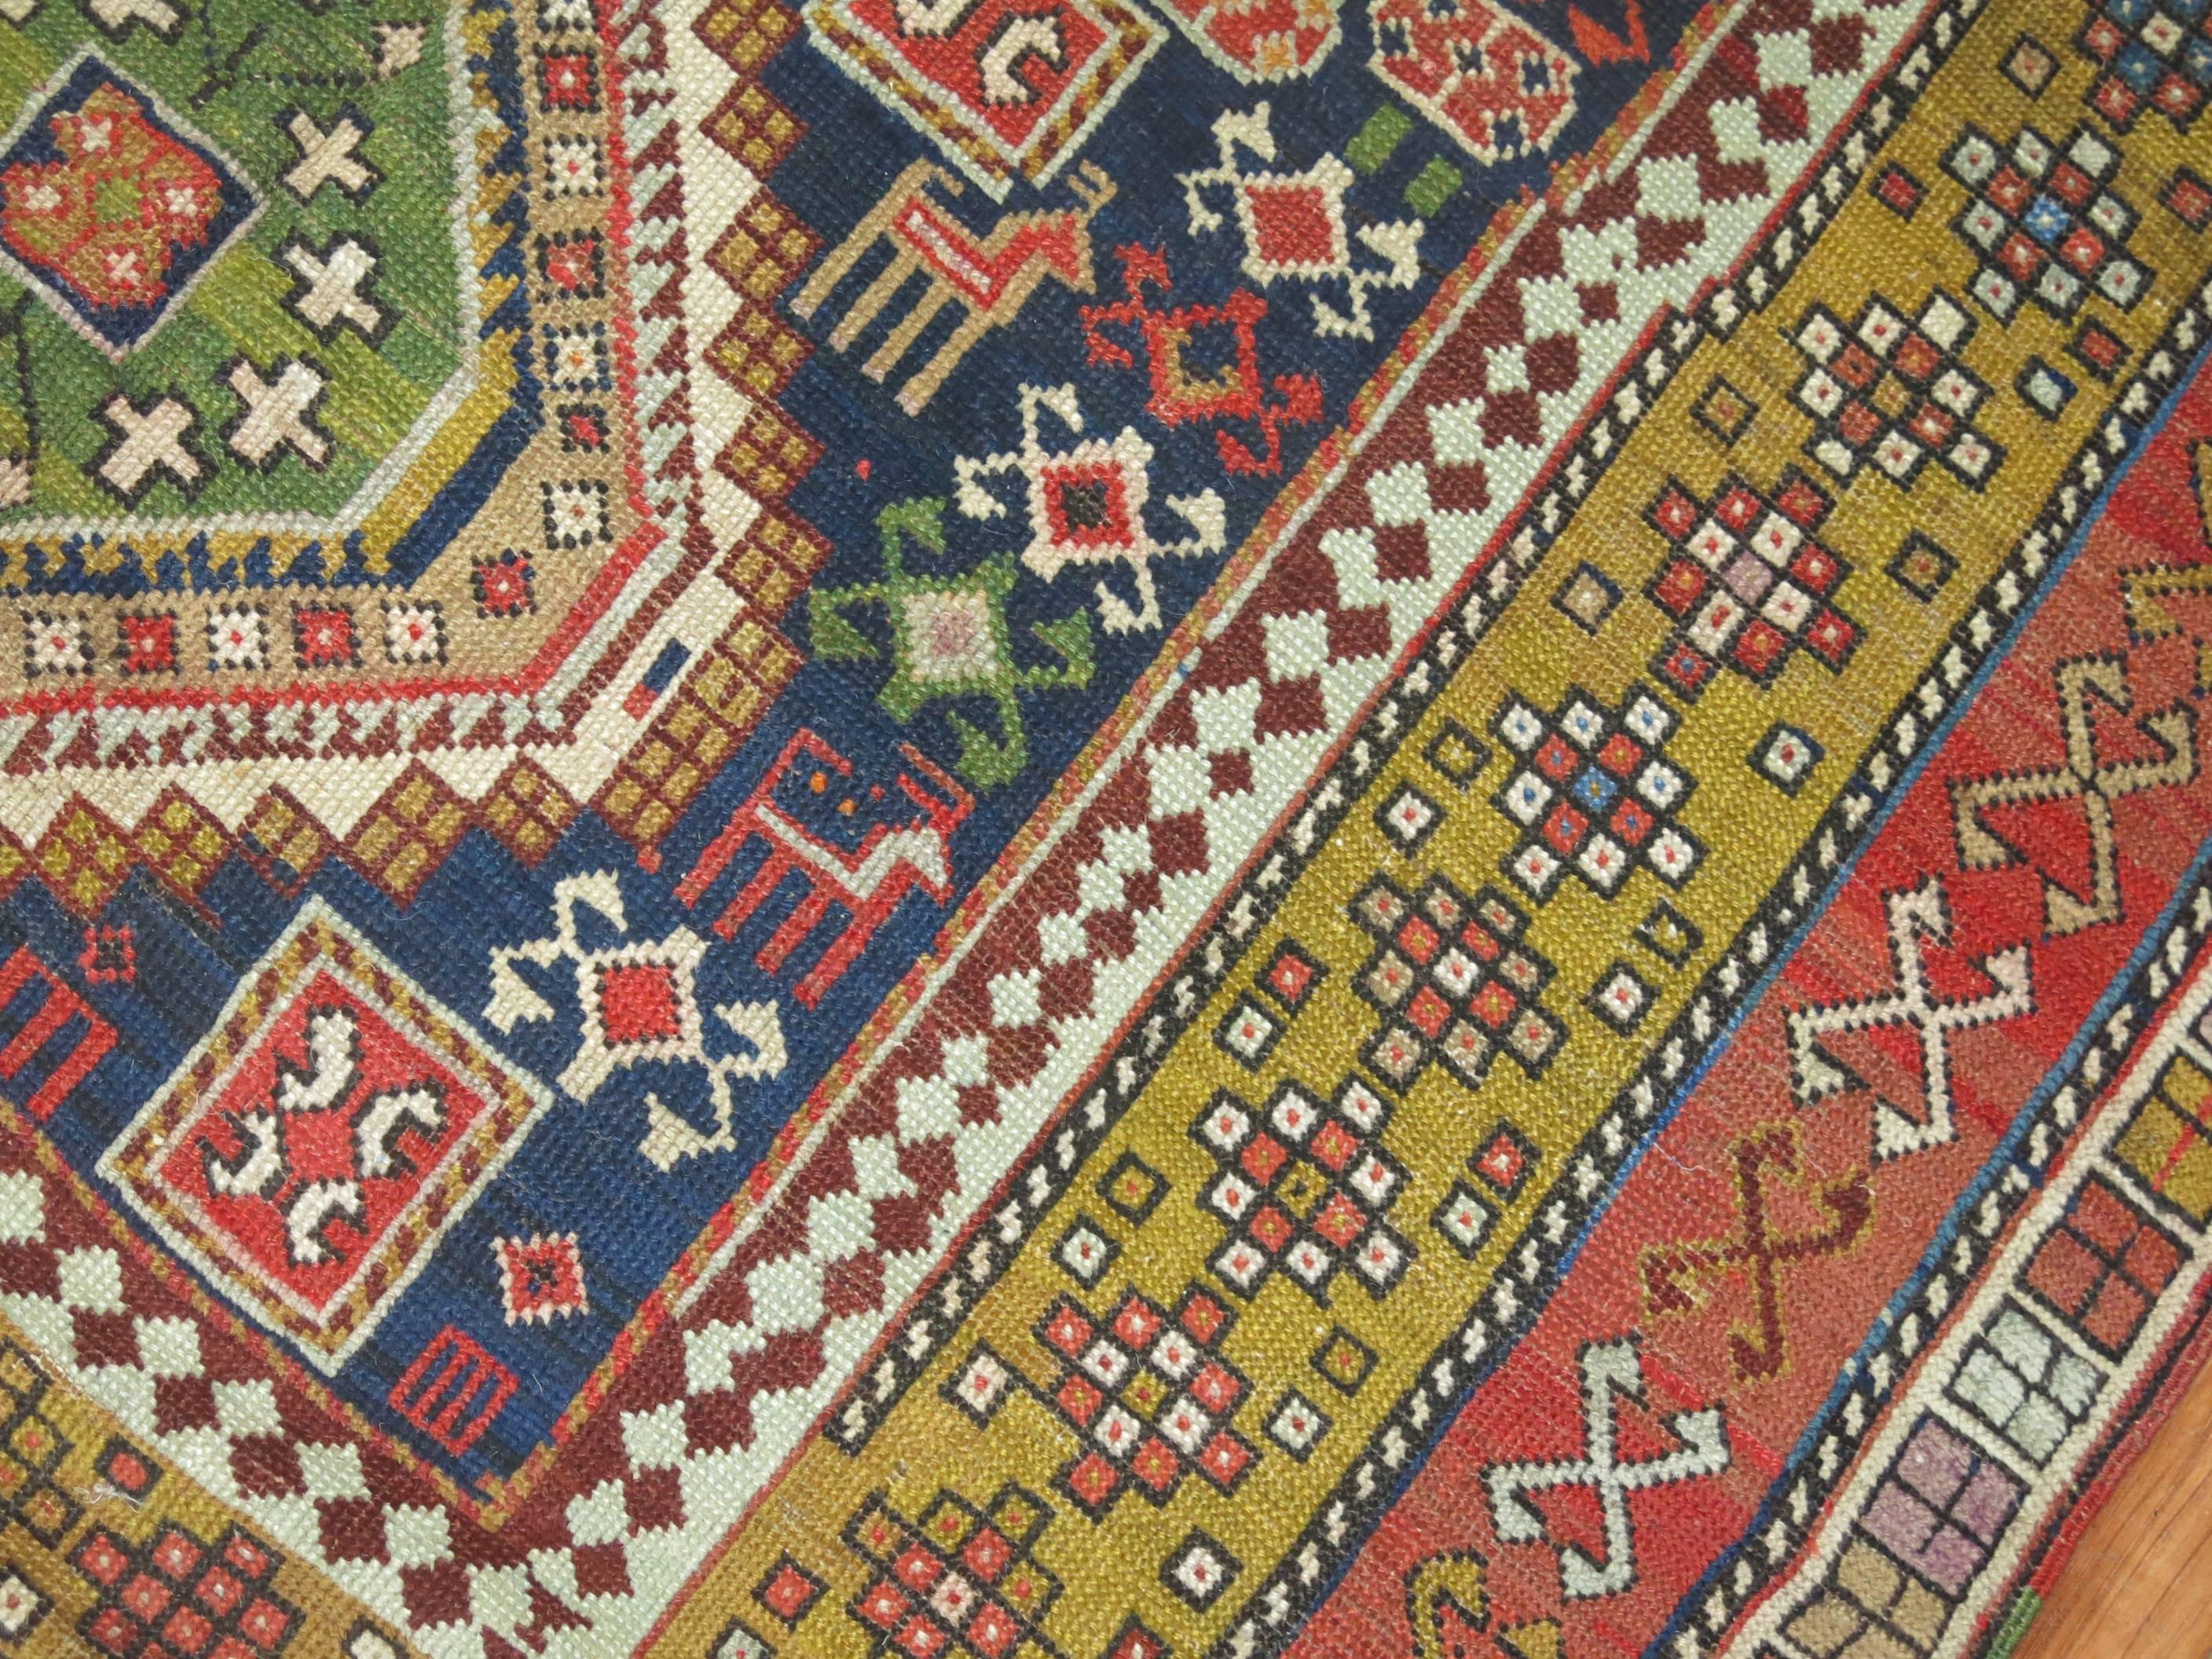 An early 20th century Shirvan rug woven in the villages of the Caucuses. 5 colorful medallions on a navy ground. Geometric, Casual, crisp are best way to describe this rug

Measures: 4'7'' x 9'.